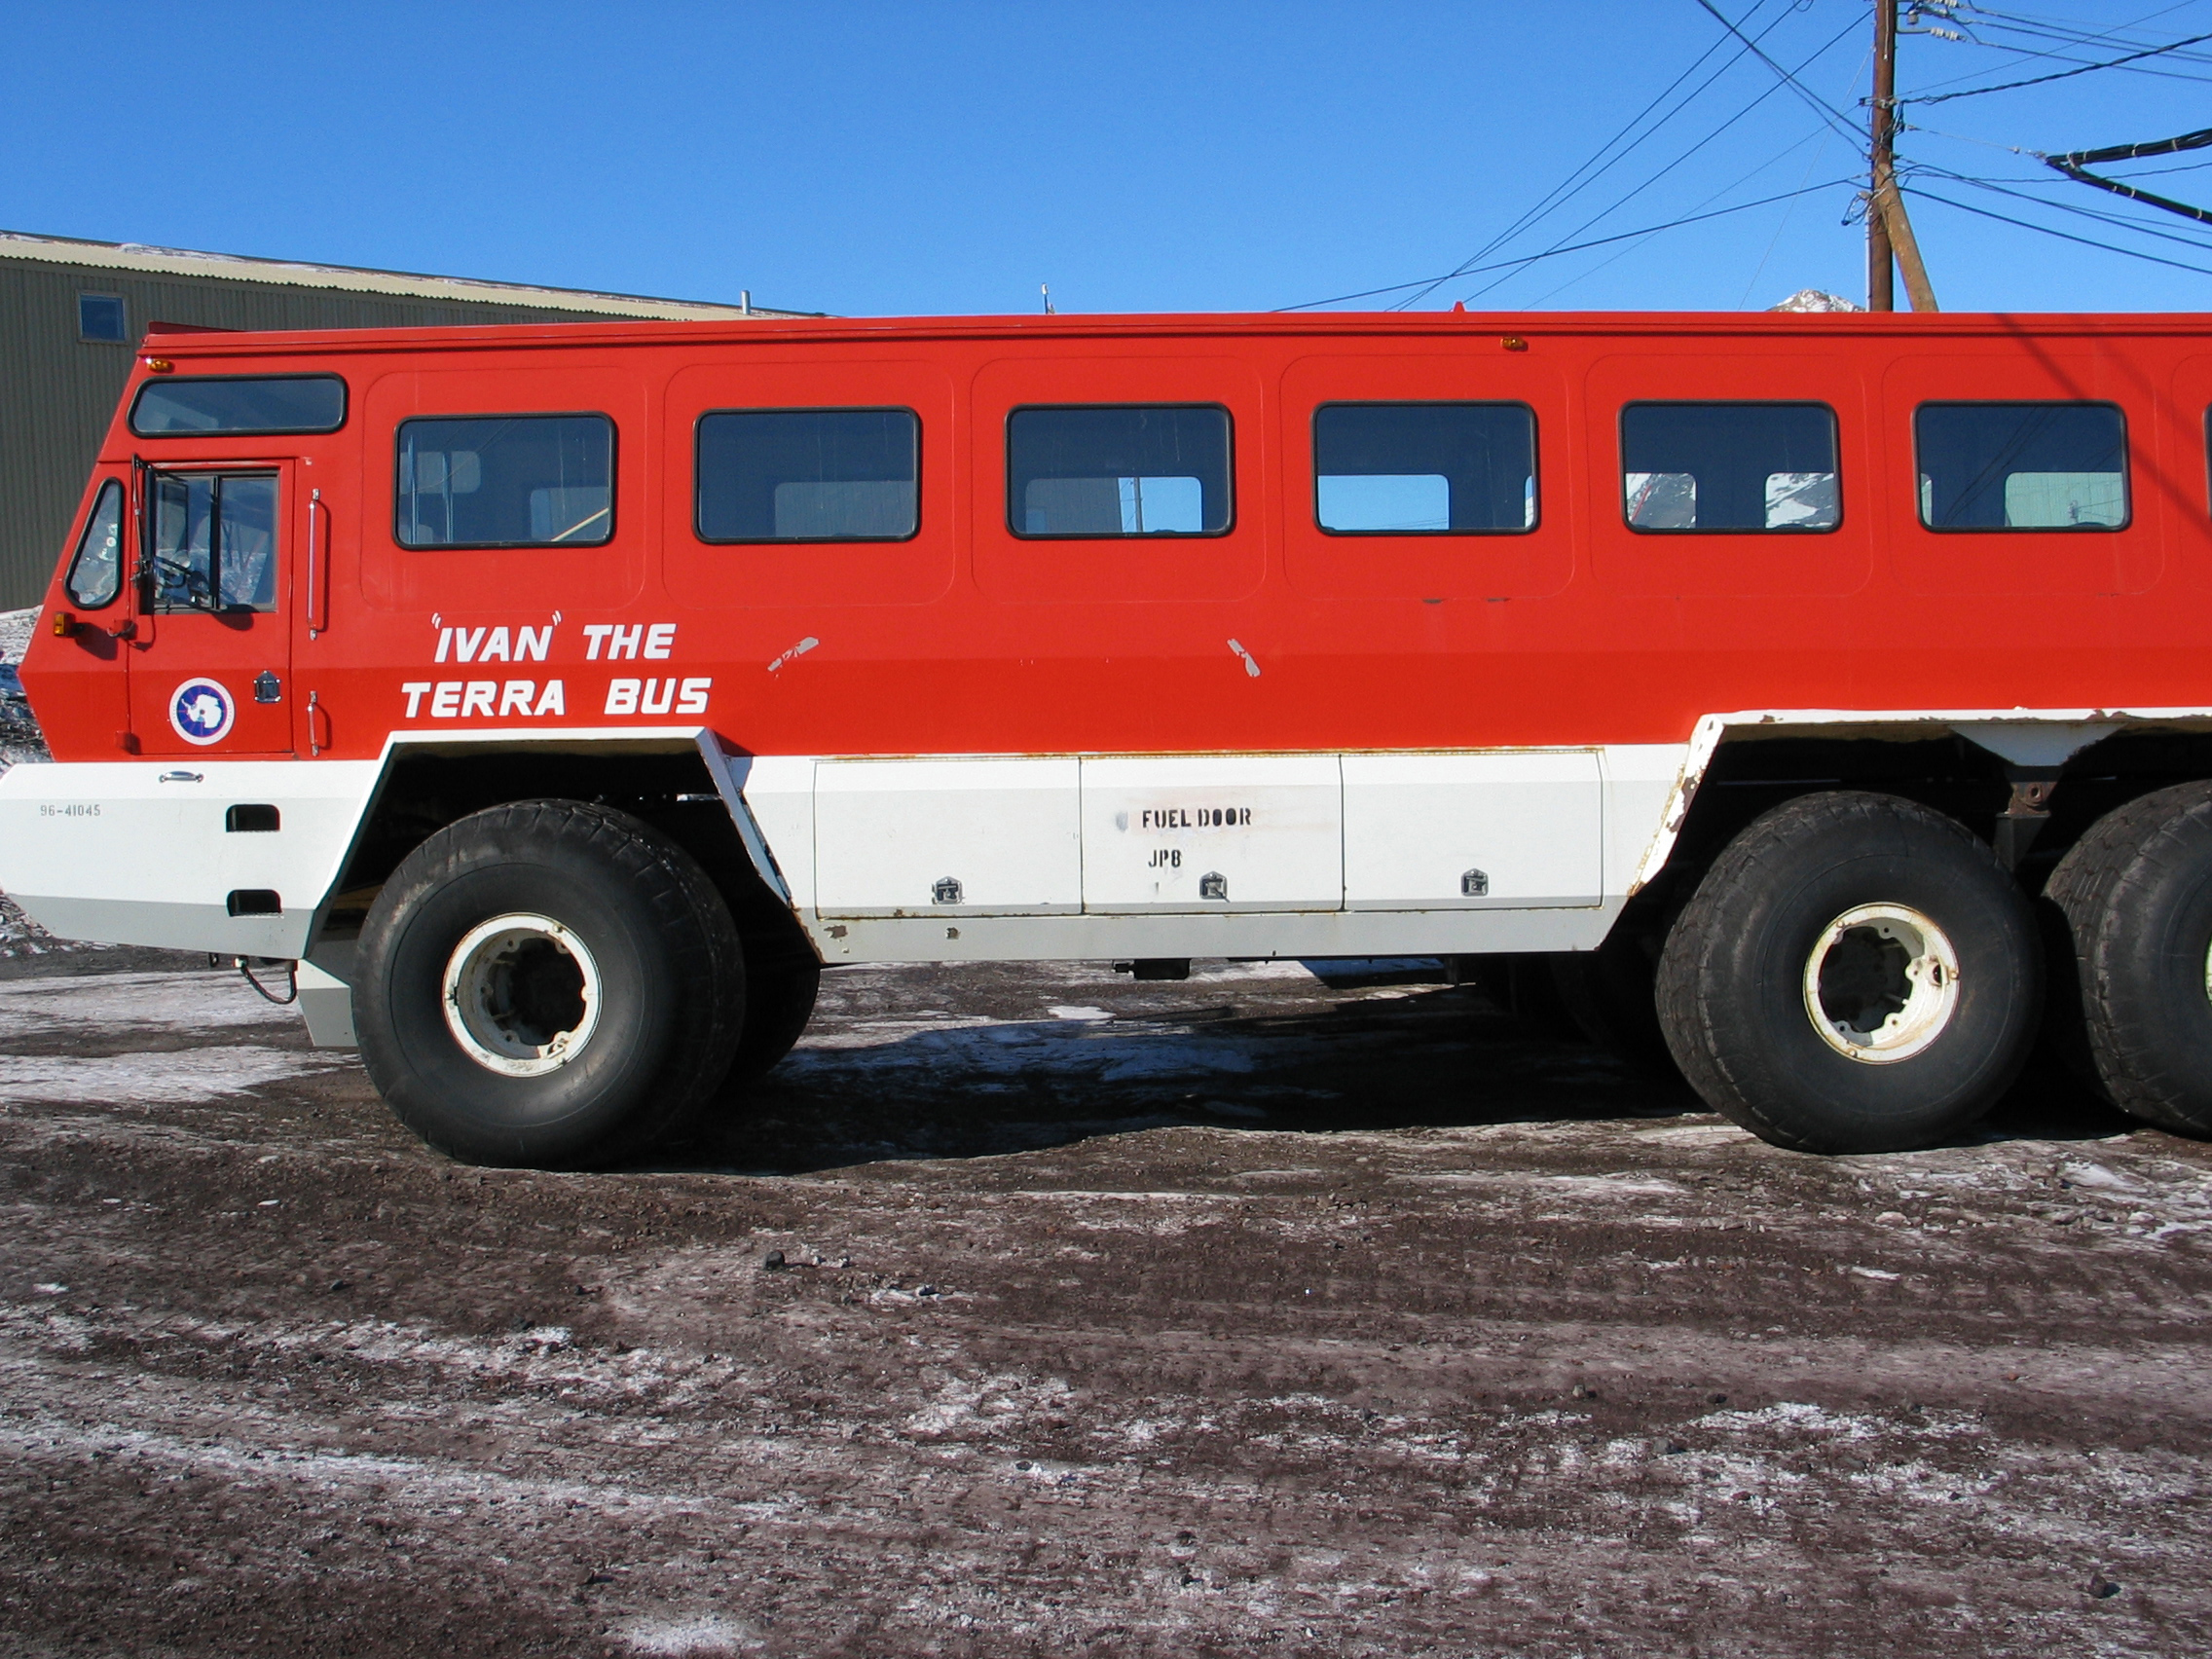 A large red bus.